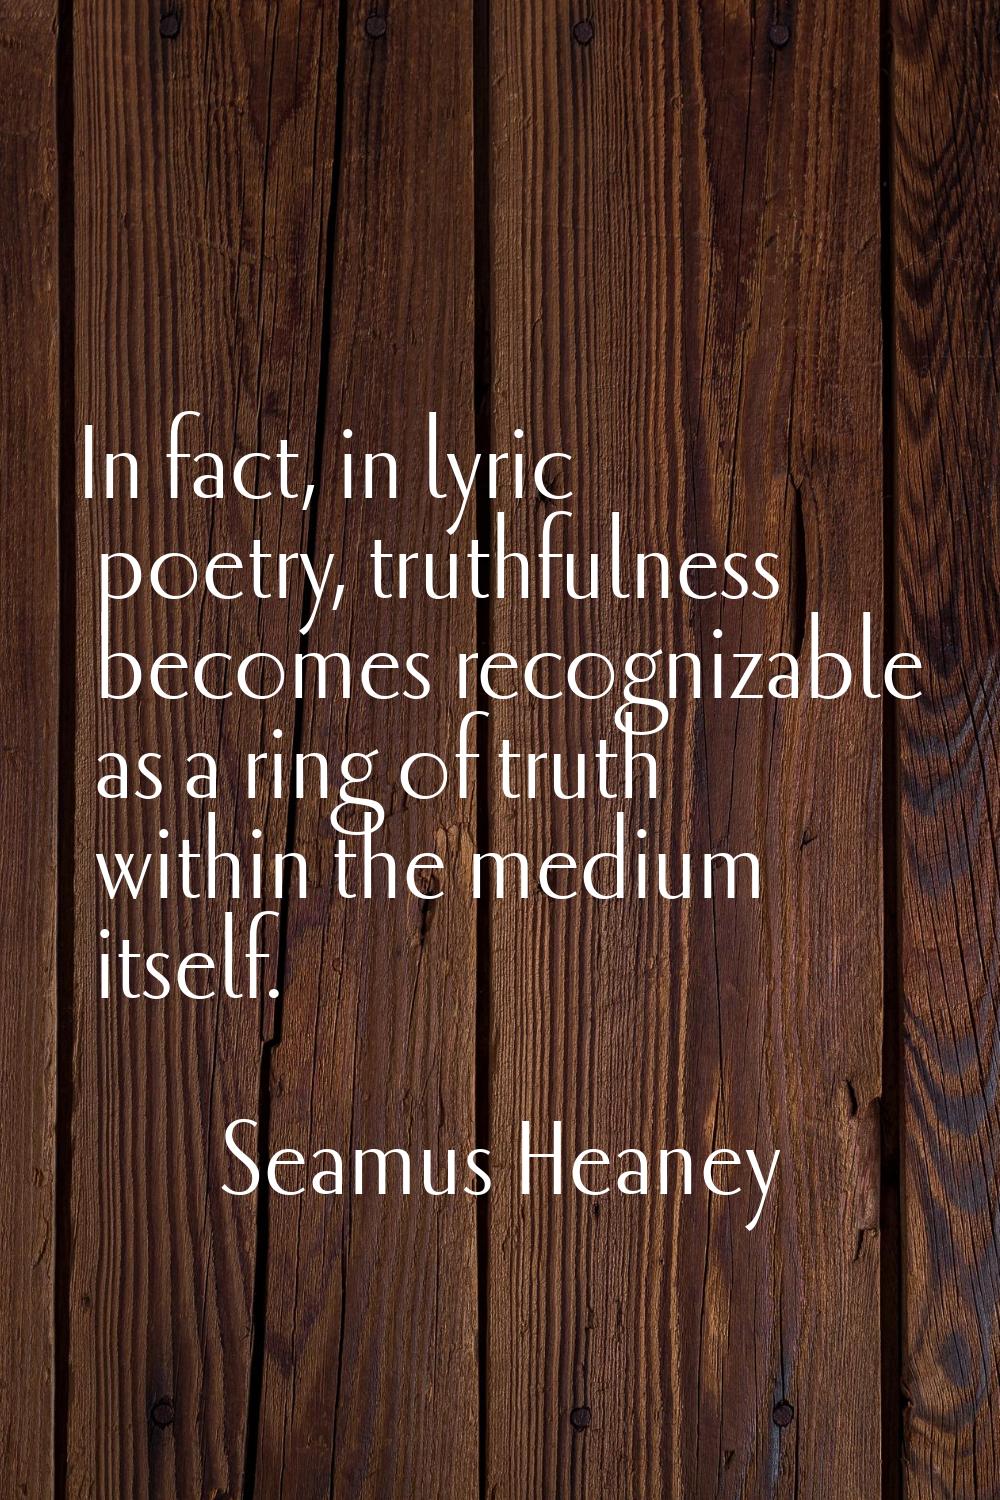 In fact, in lyric poetry, truthfulness becomes recognizable as a ring of truth within the medium it